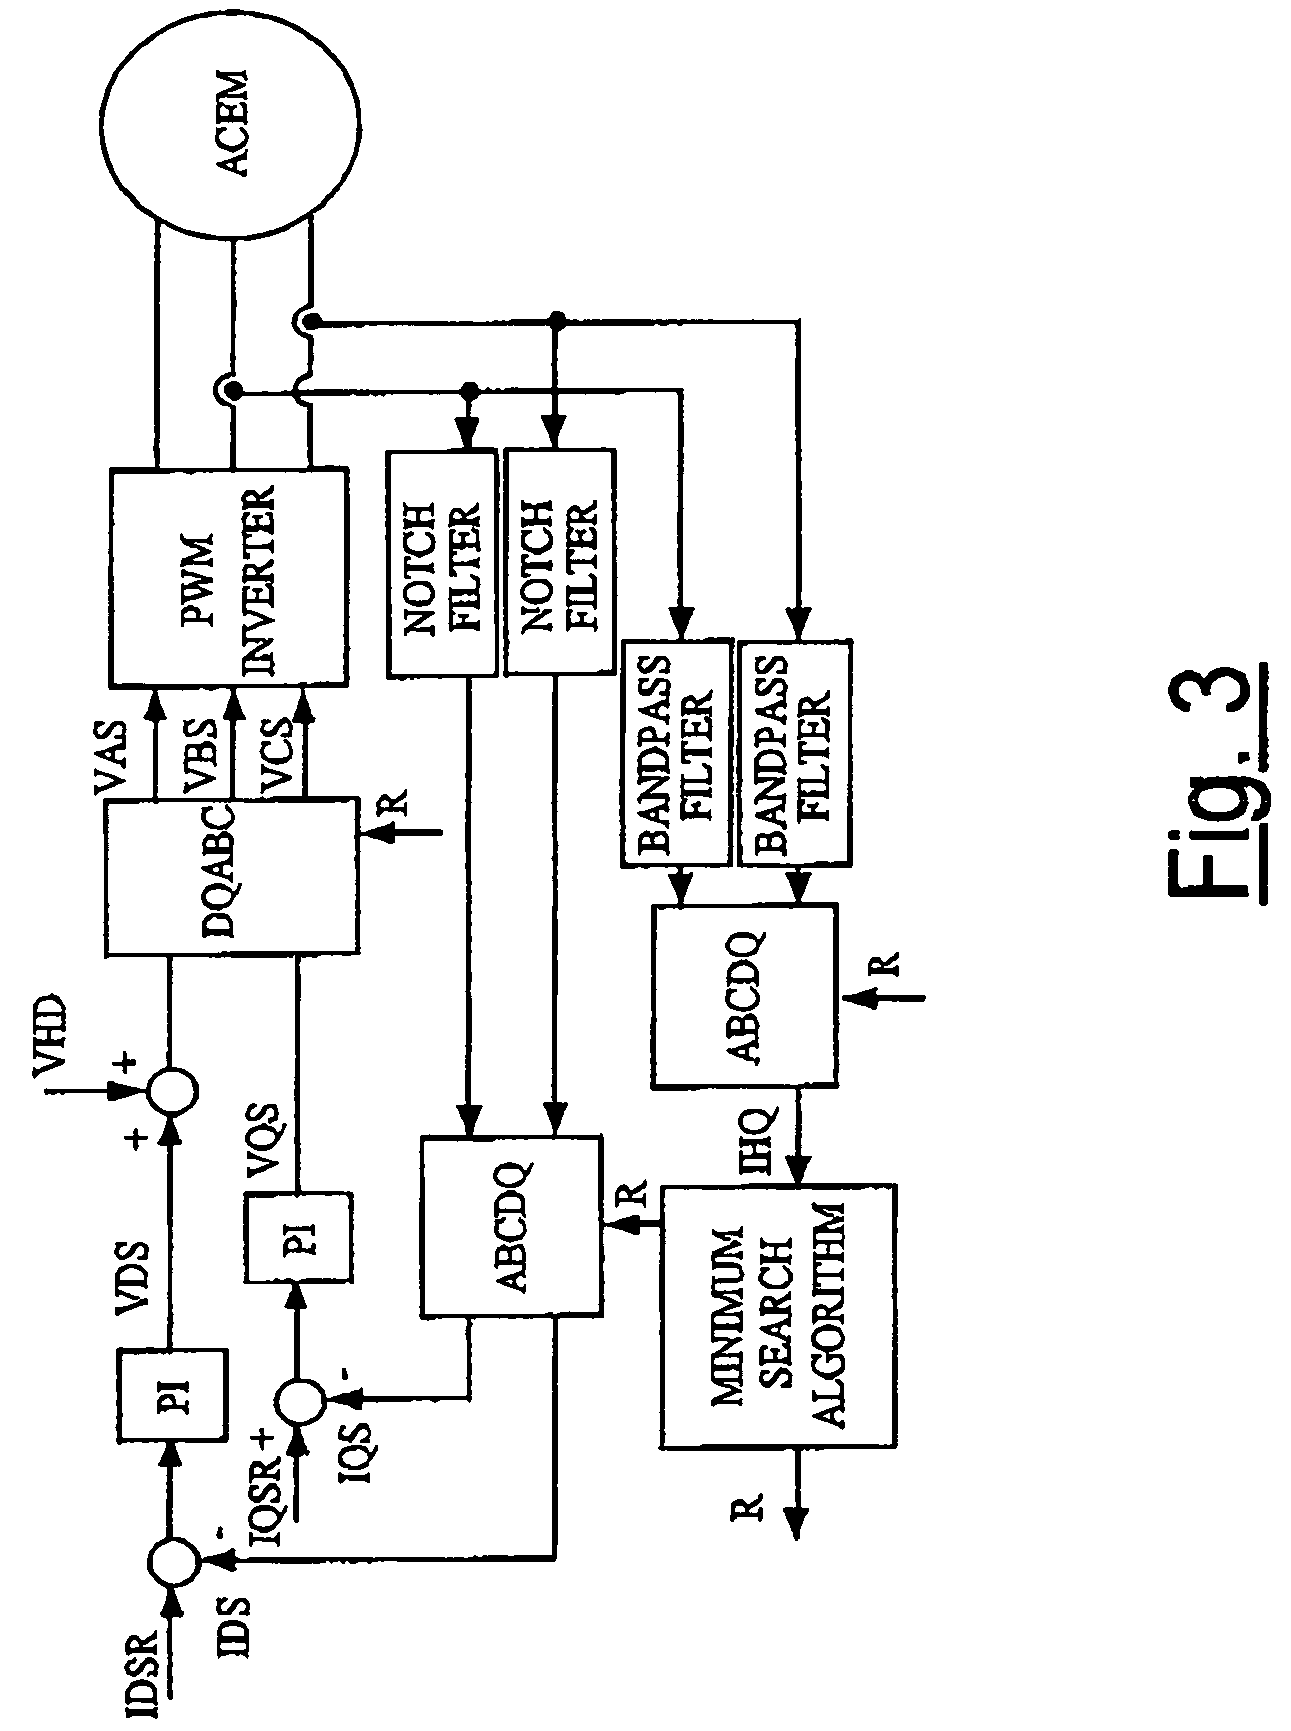 Control system and method for electric drives with a.c. motors